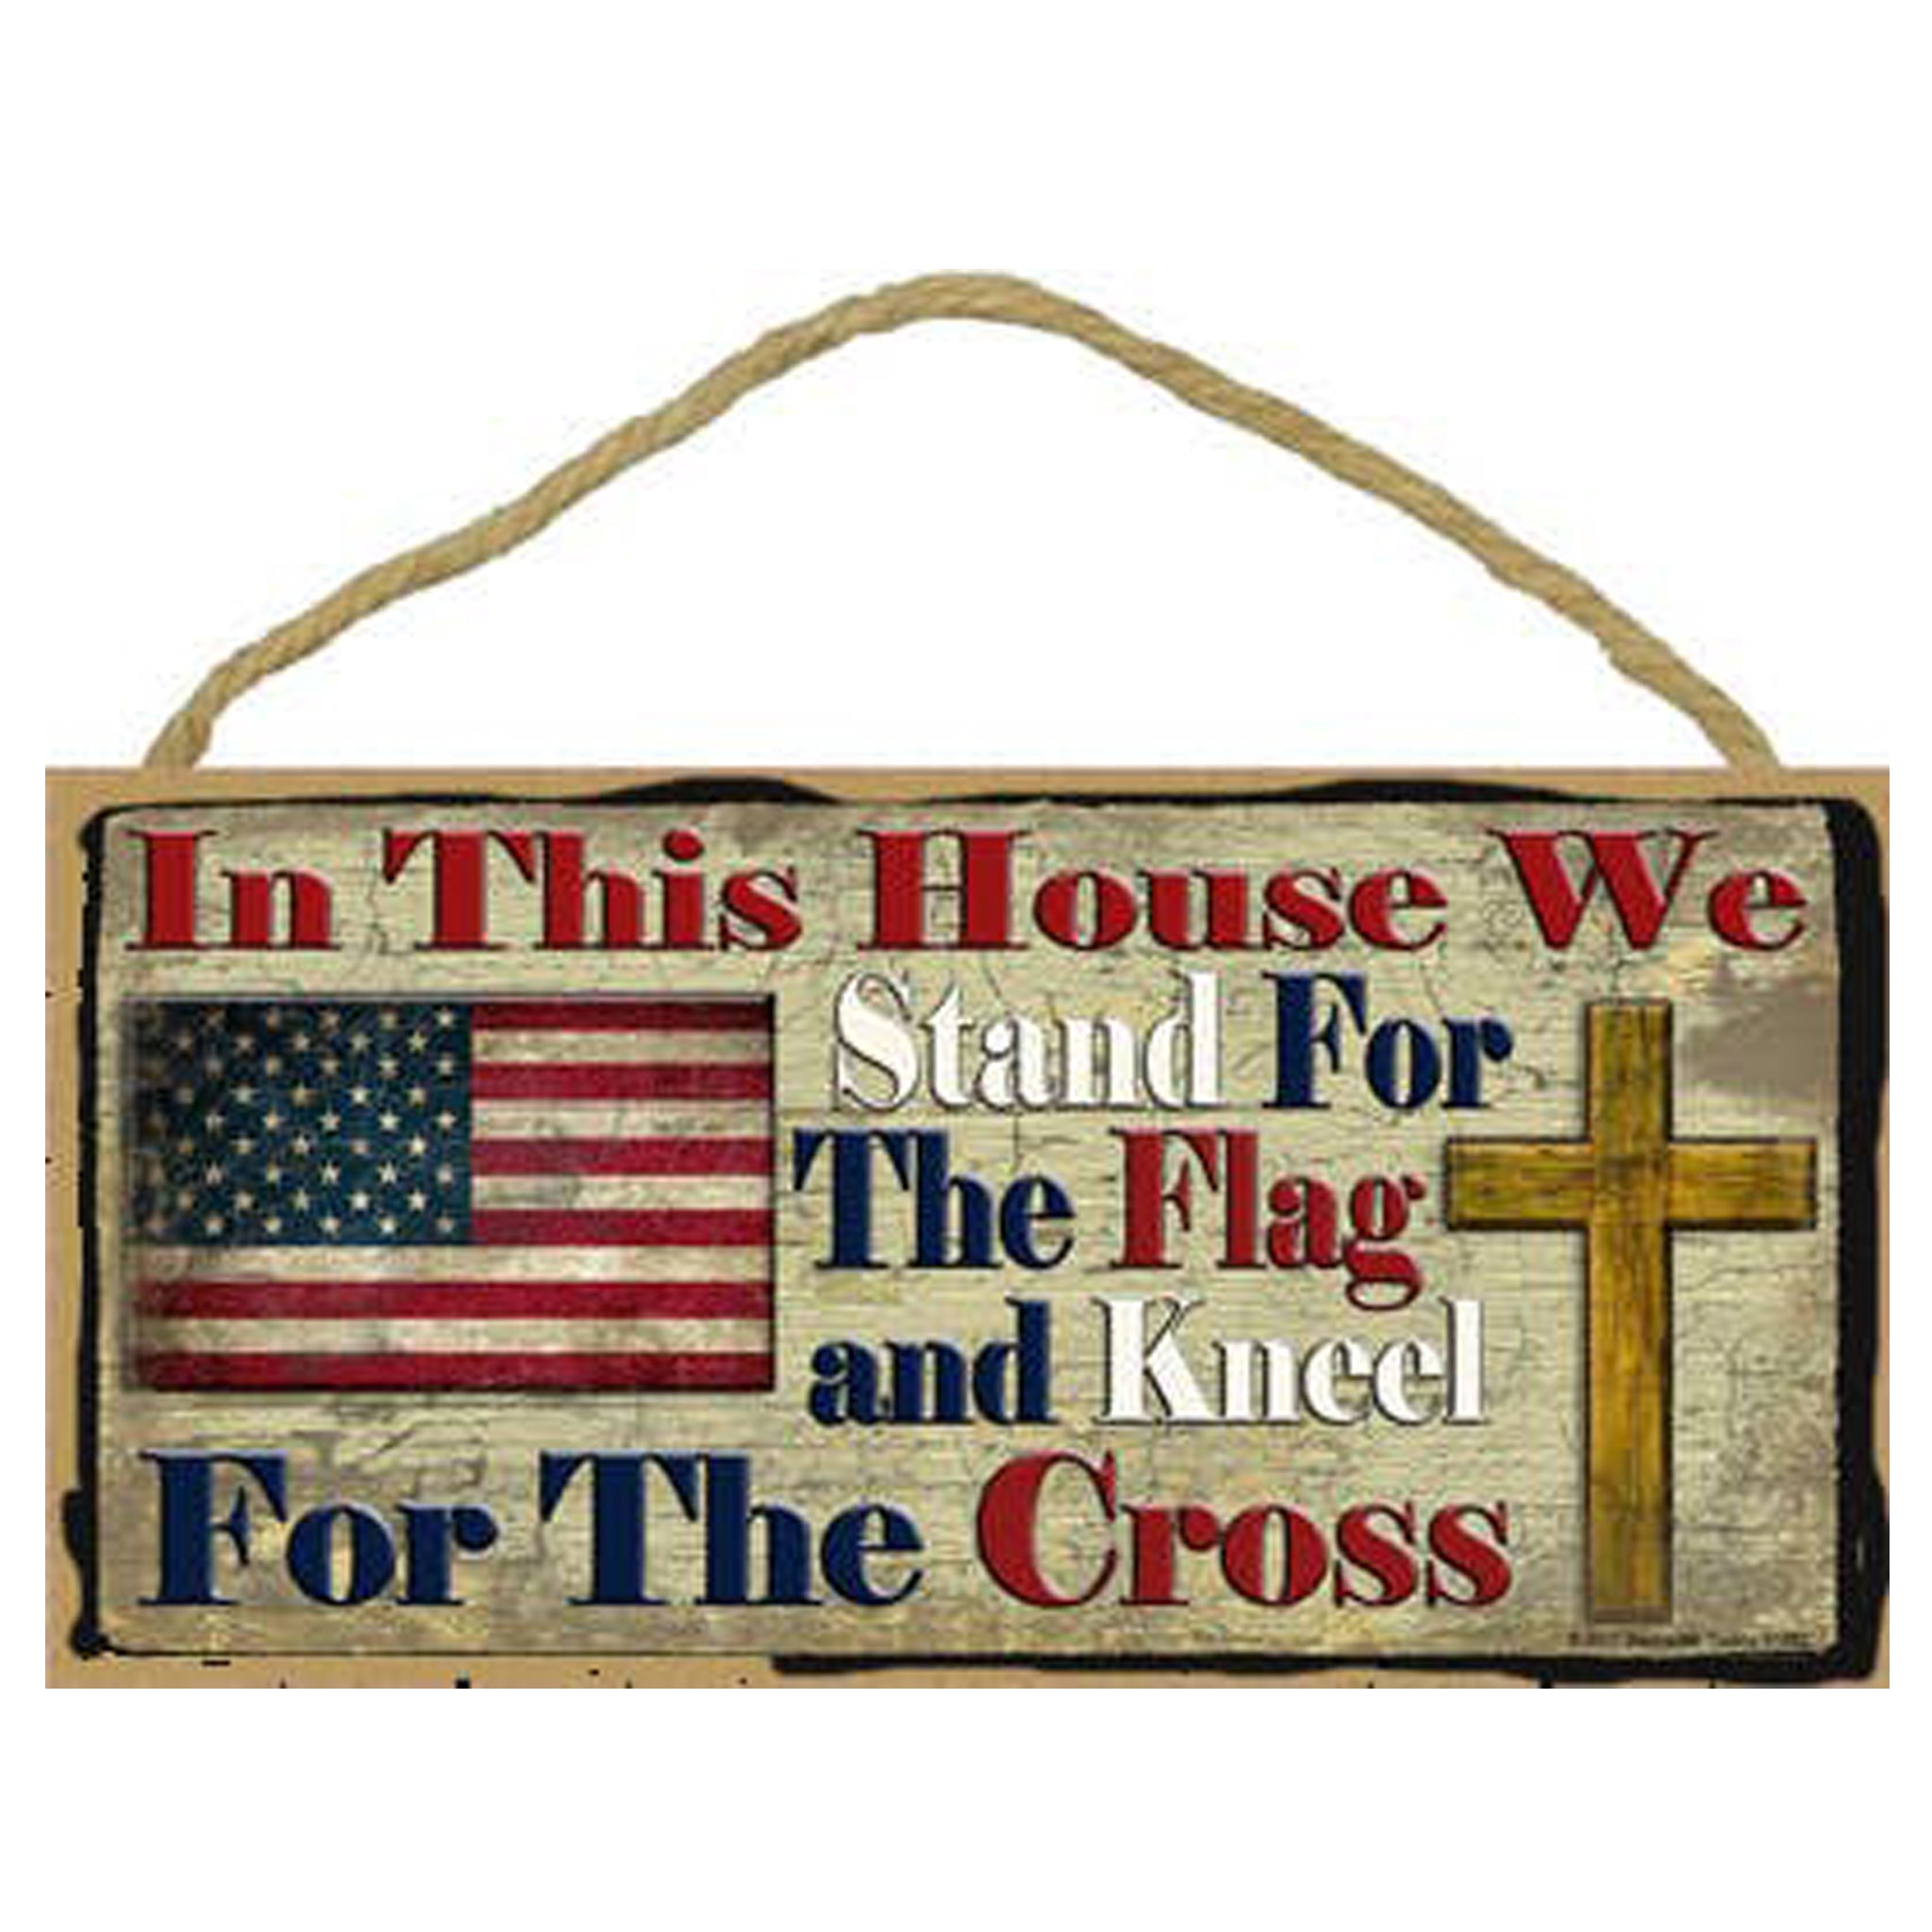 Stand For Flag And Kneel For Cross Wood Sign – The Maryland Store